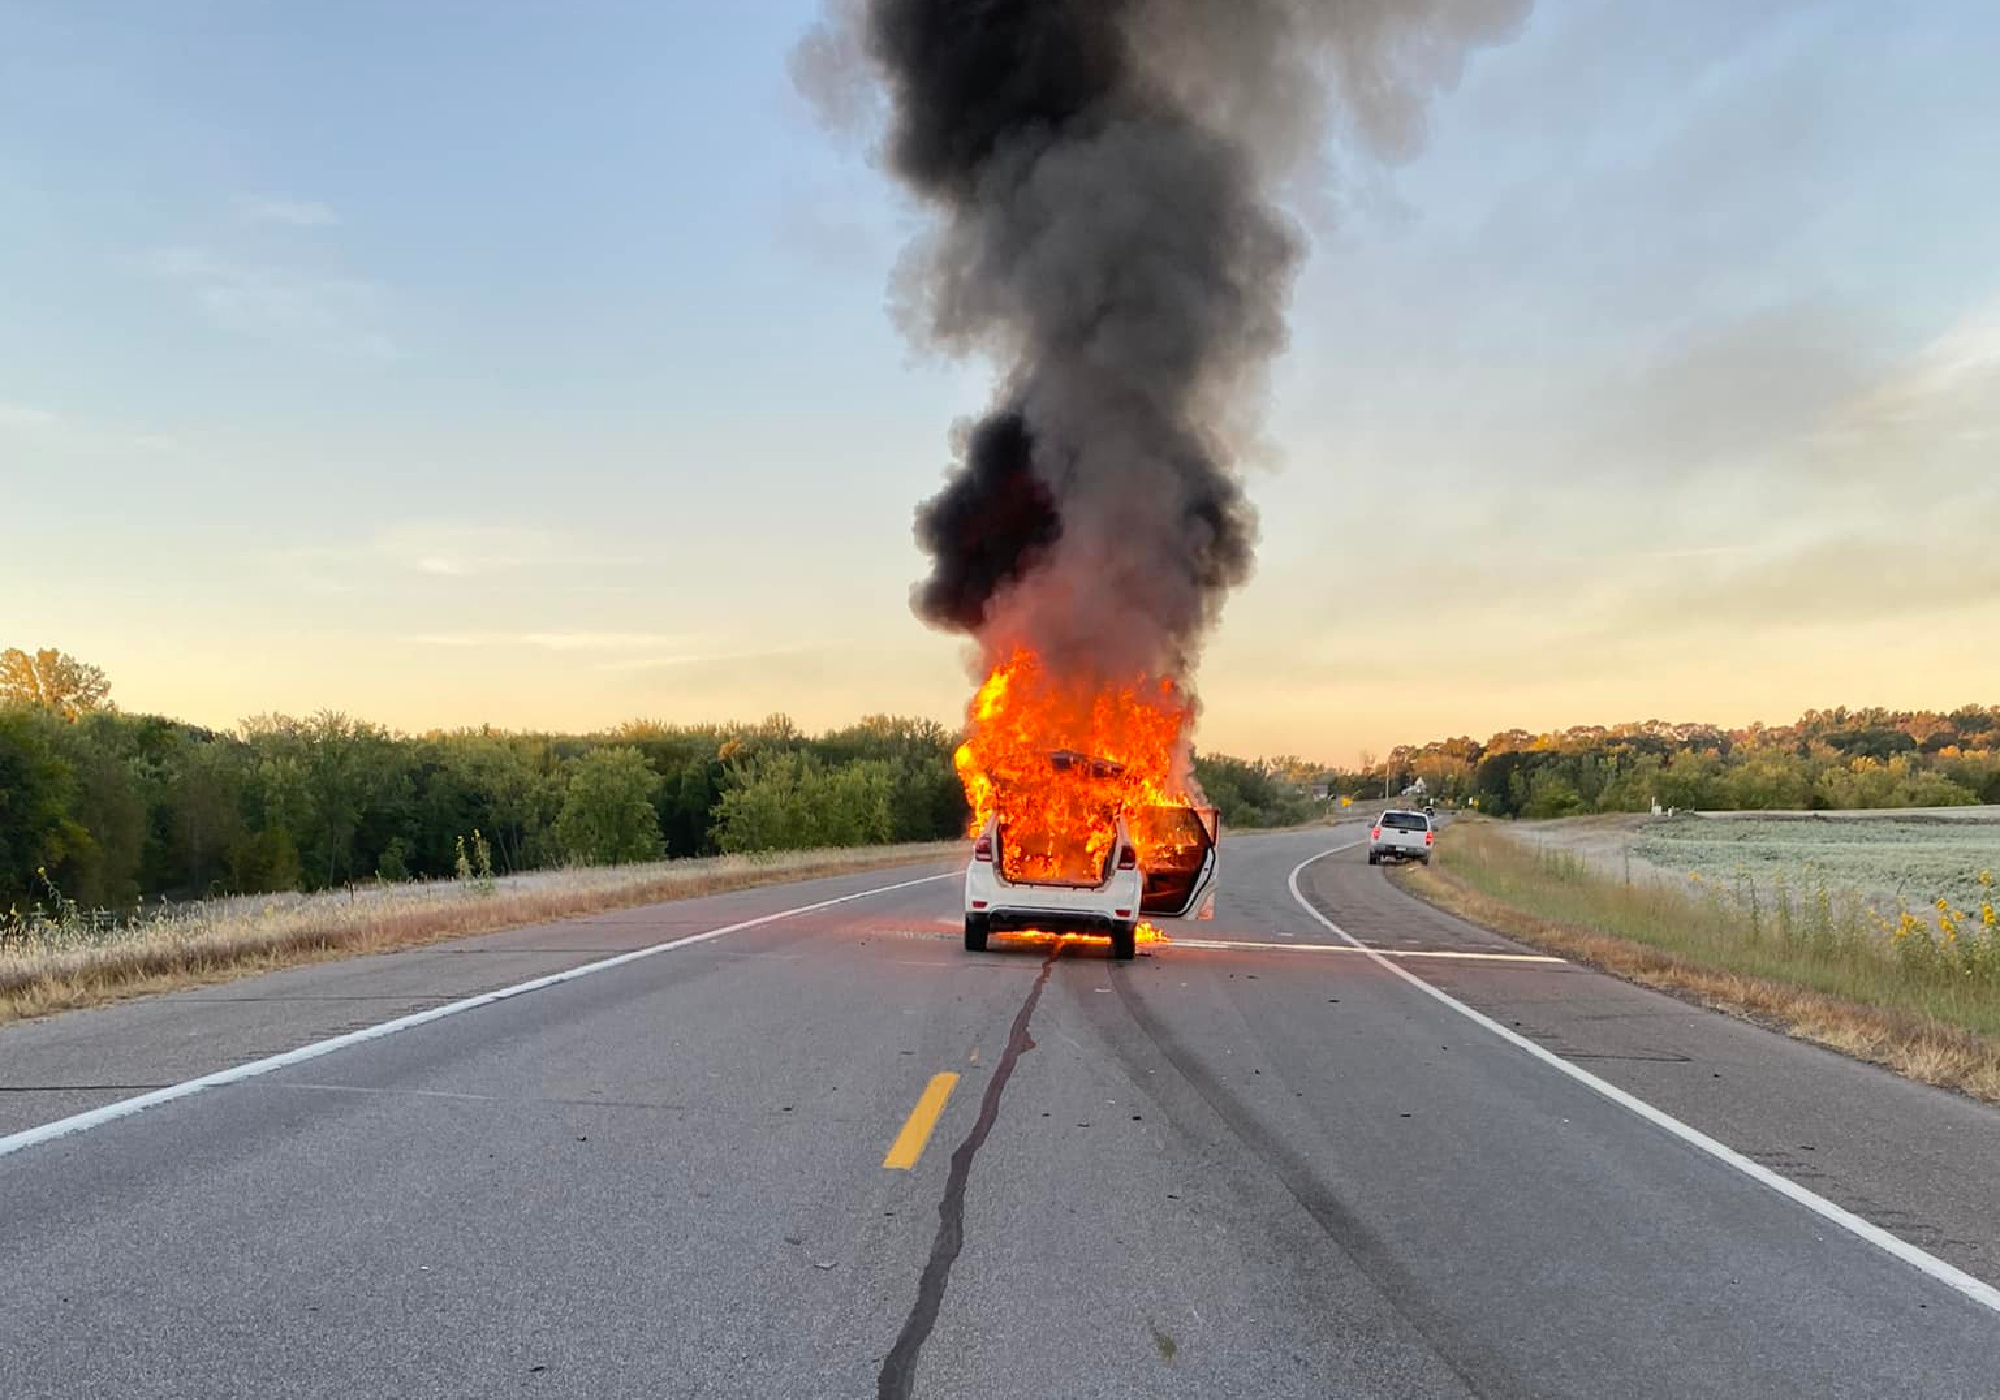 Vehicle fire after deer collision